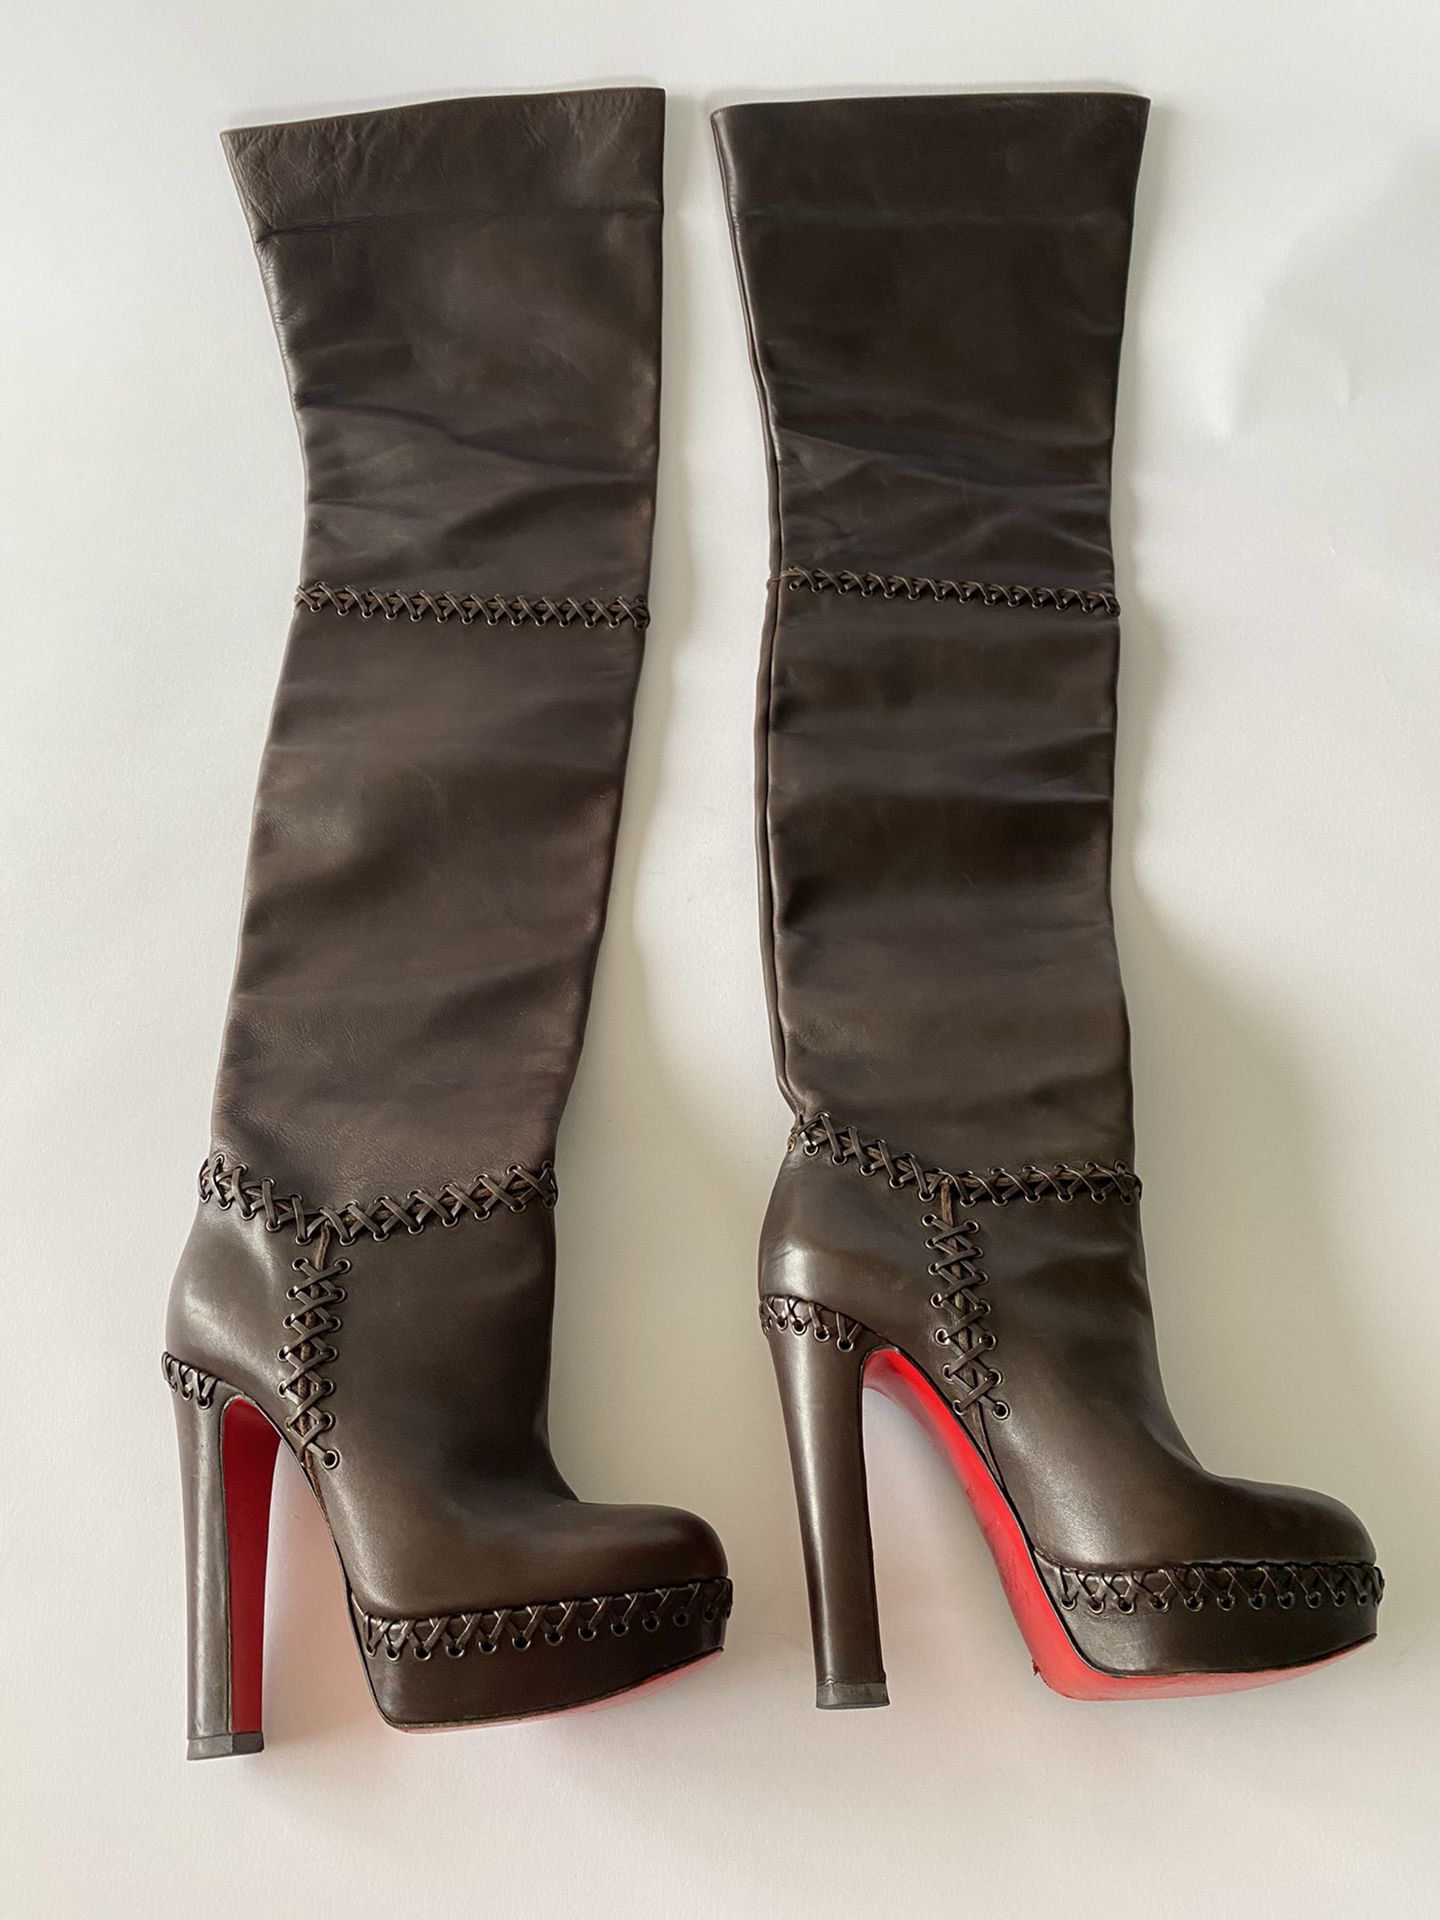 Christian Louboutin High Boots for Sale in Avon, CO - OfferUp